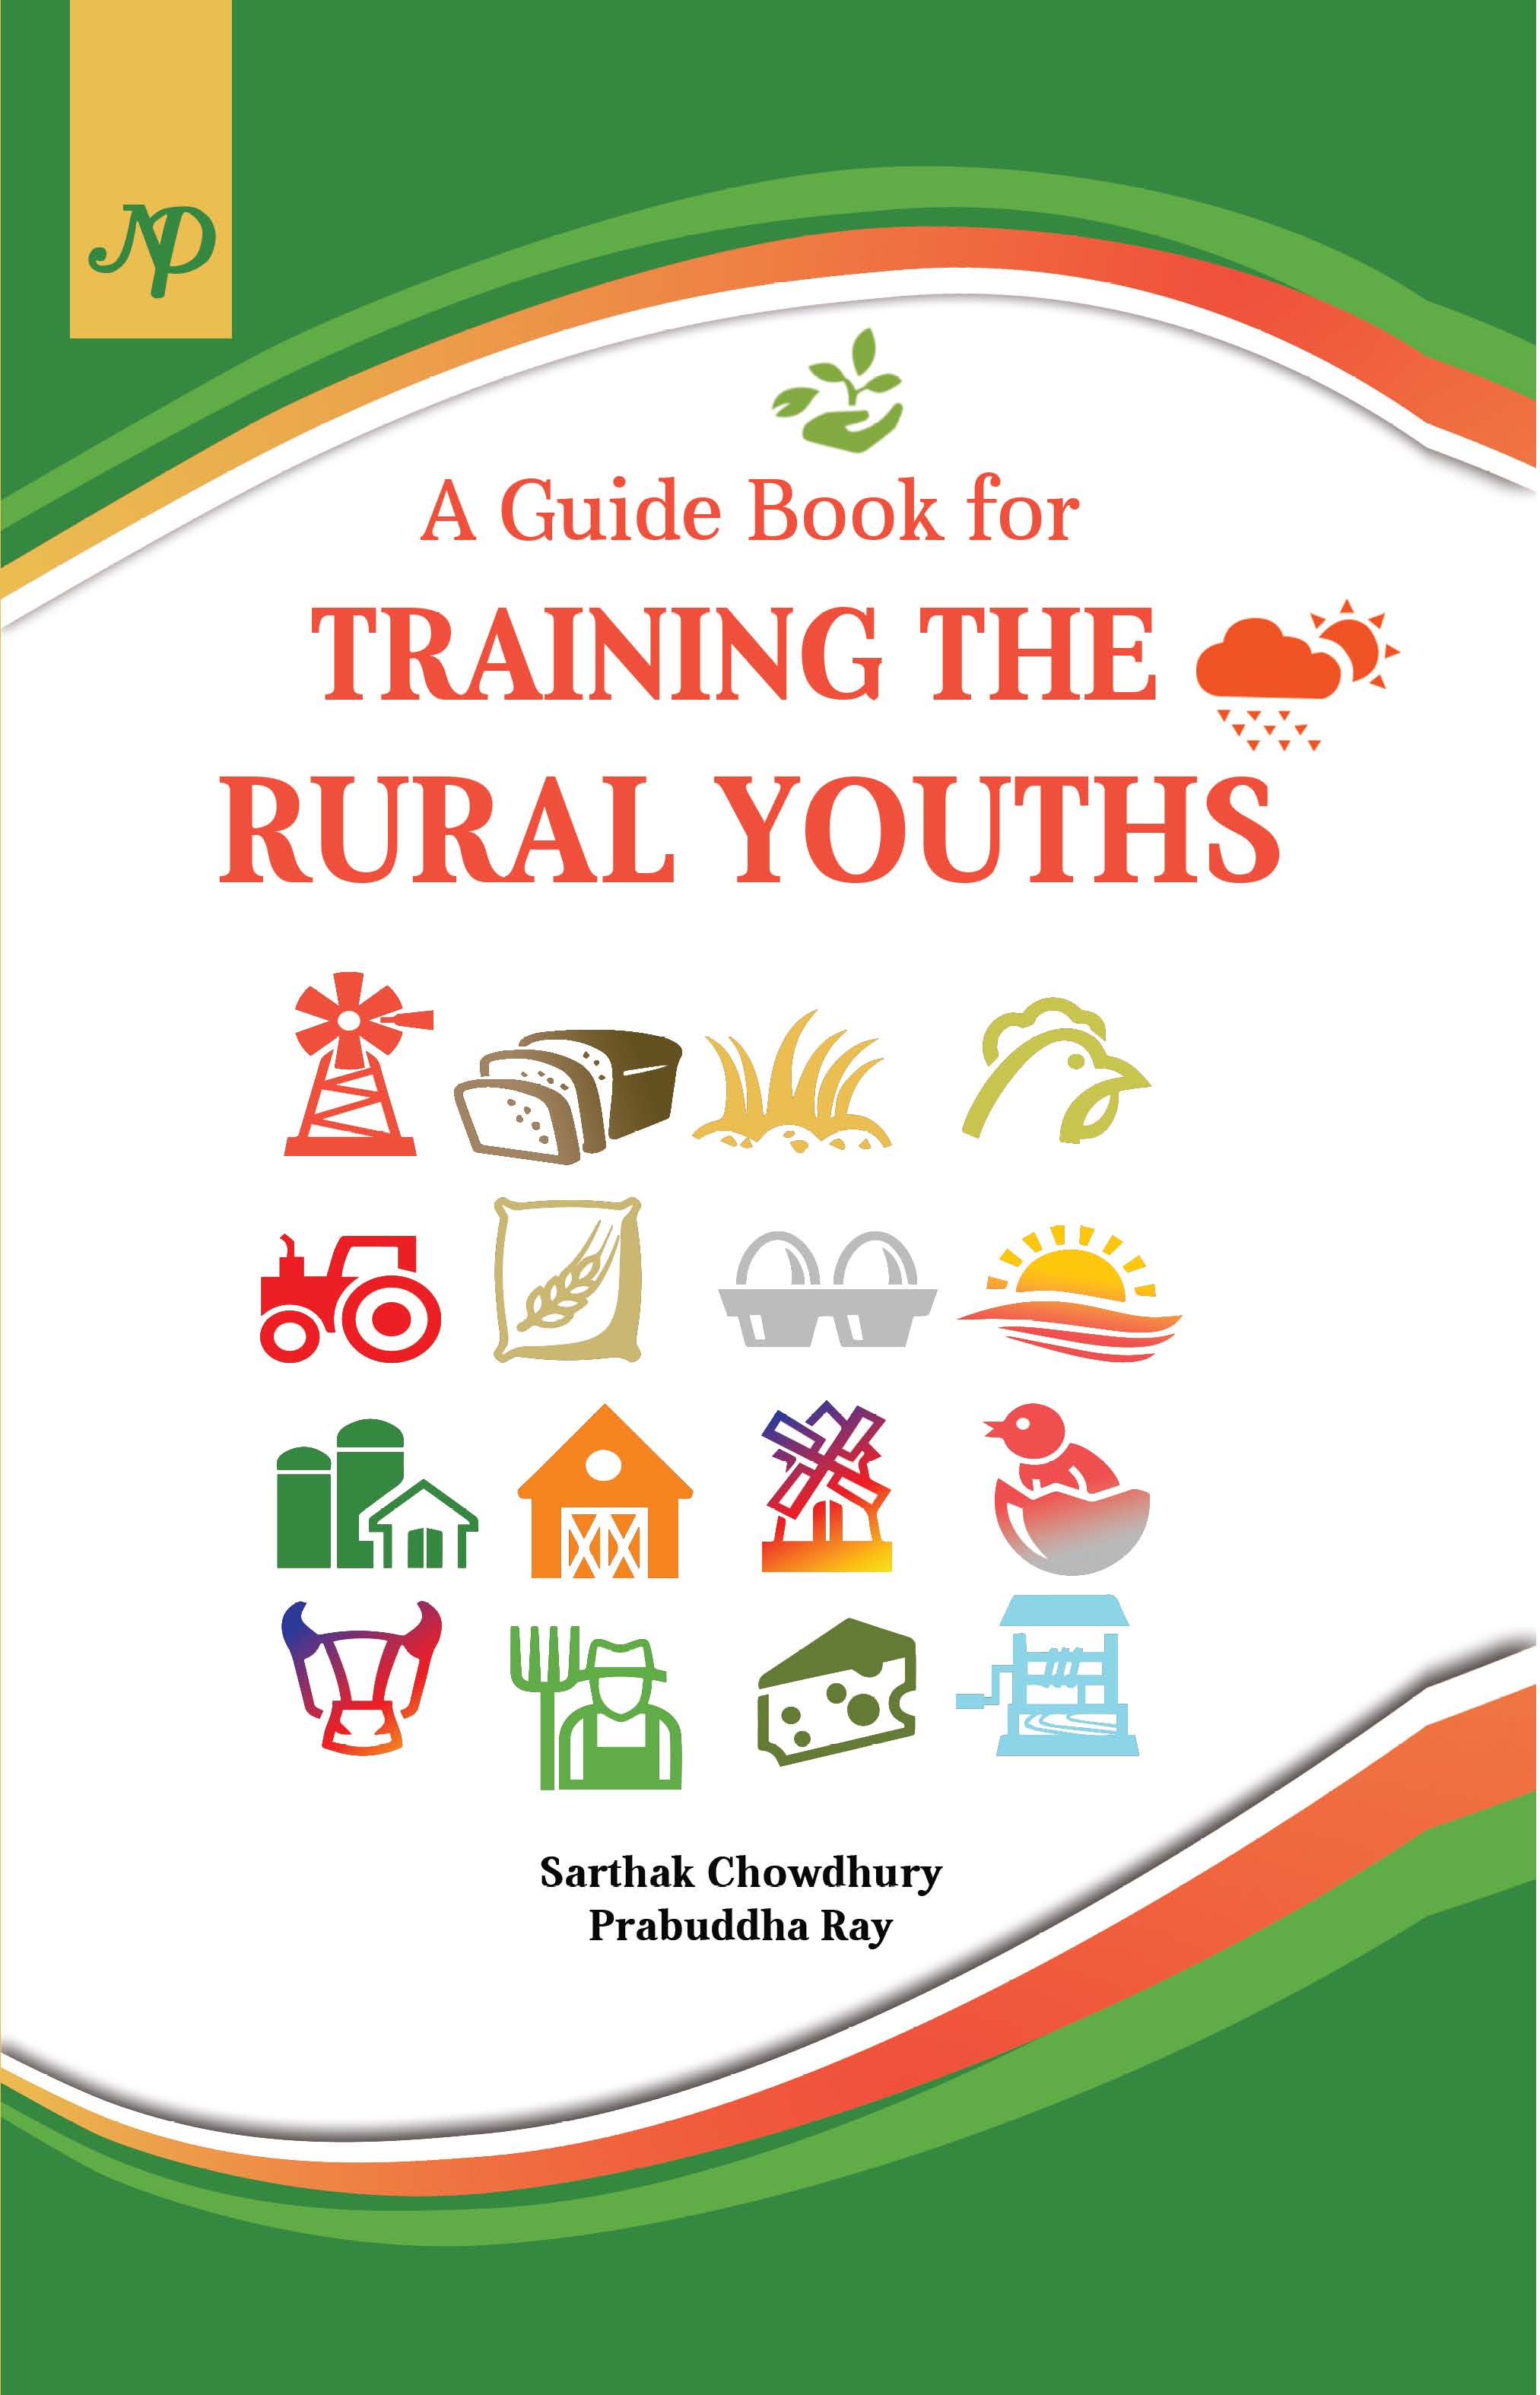 Training the Rural Youths.jpg